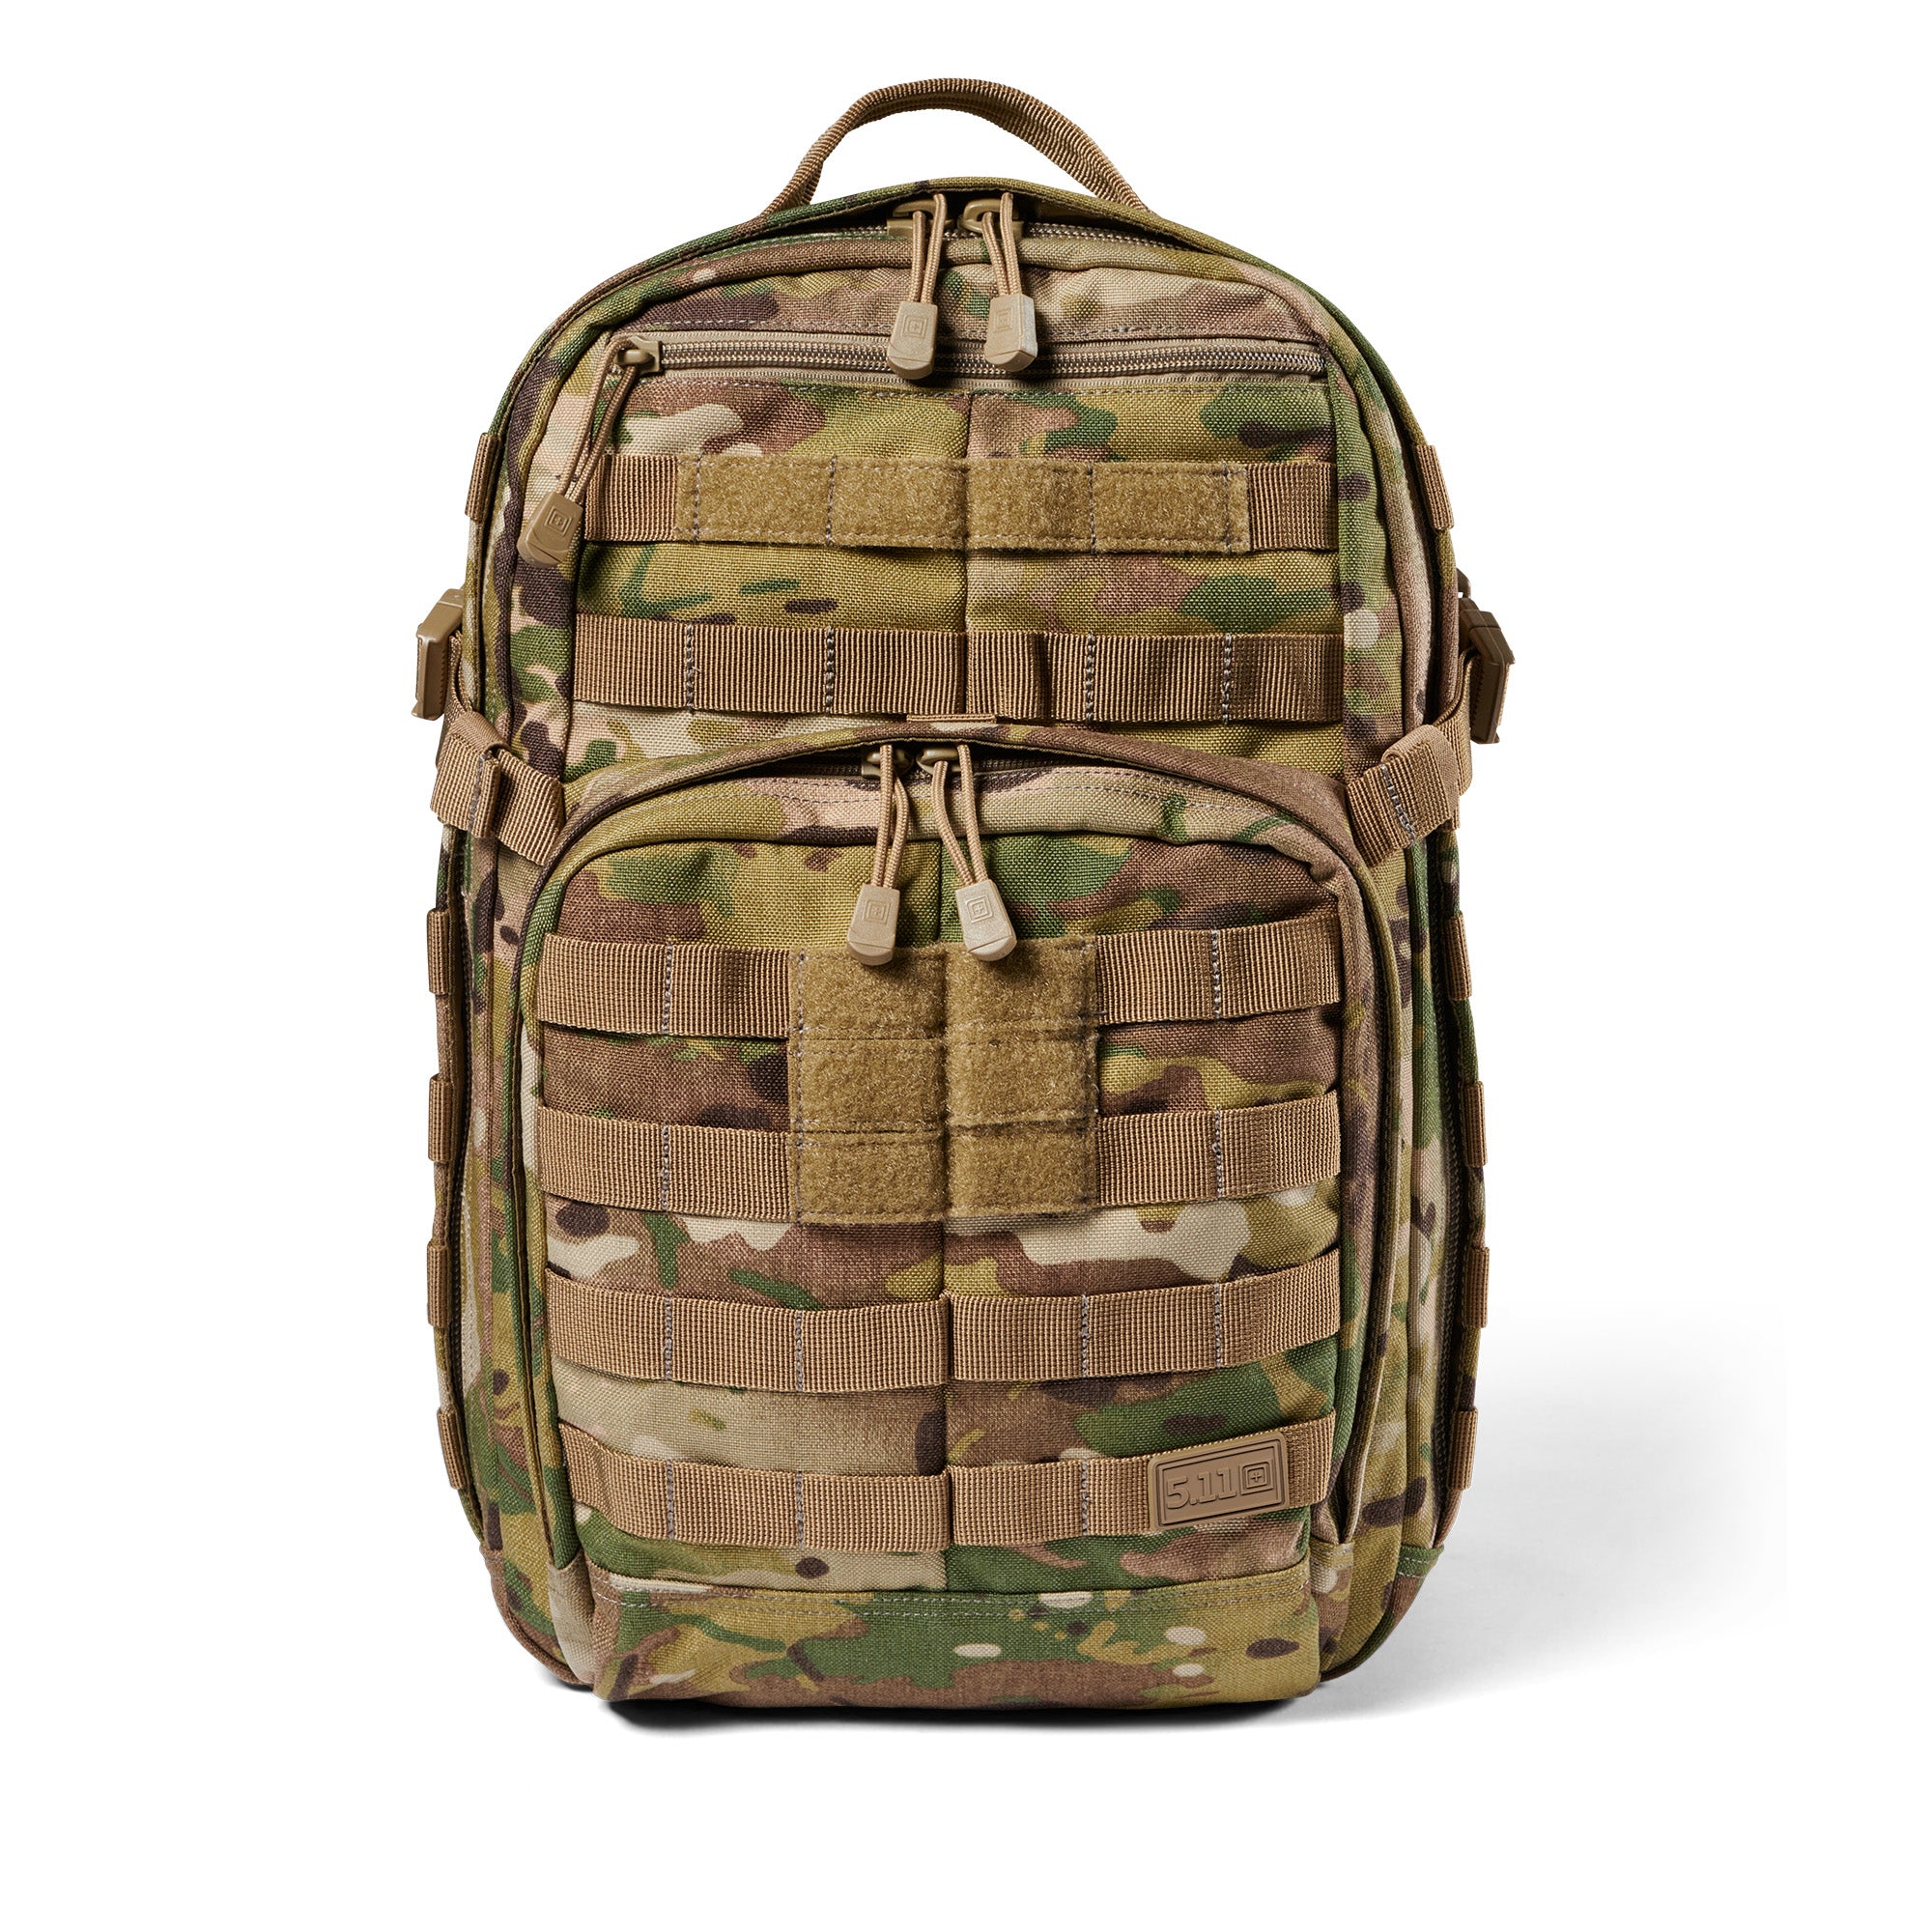 5.11 Tactical RUSH12 Military Backpack, Molle Bag Rucksack Pack, 24 Liter  Small, Style 56892 